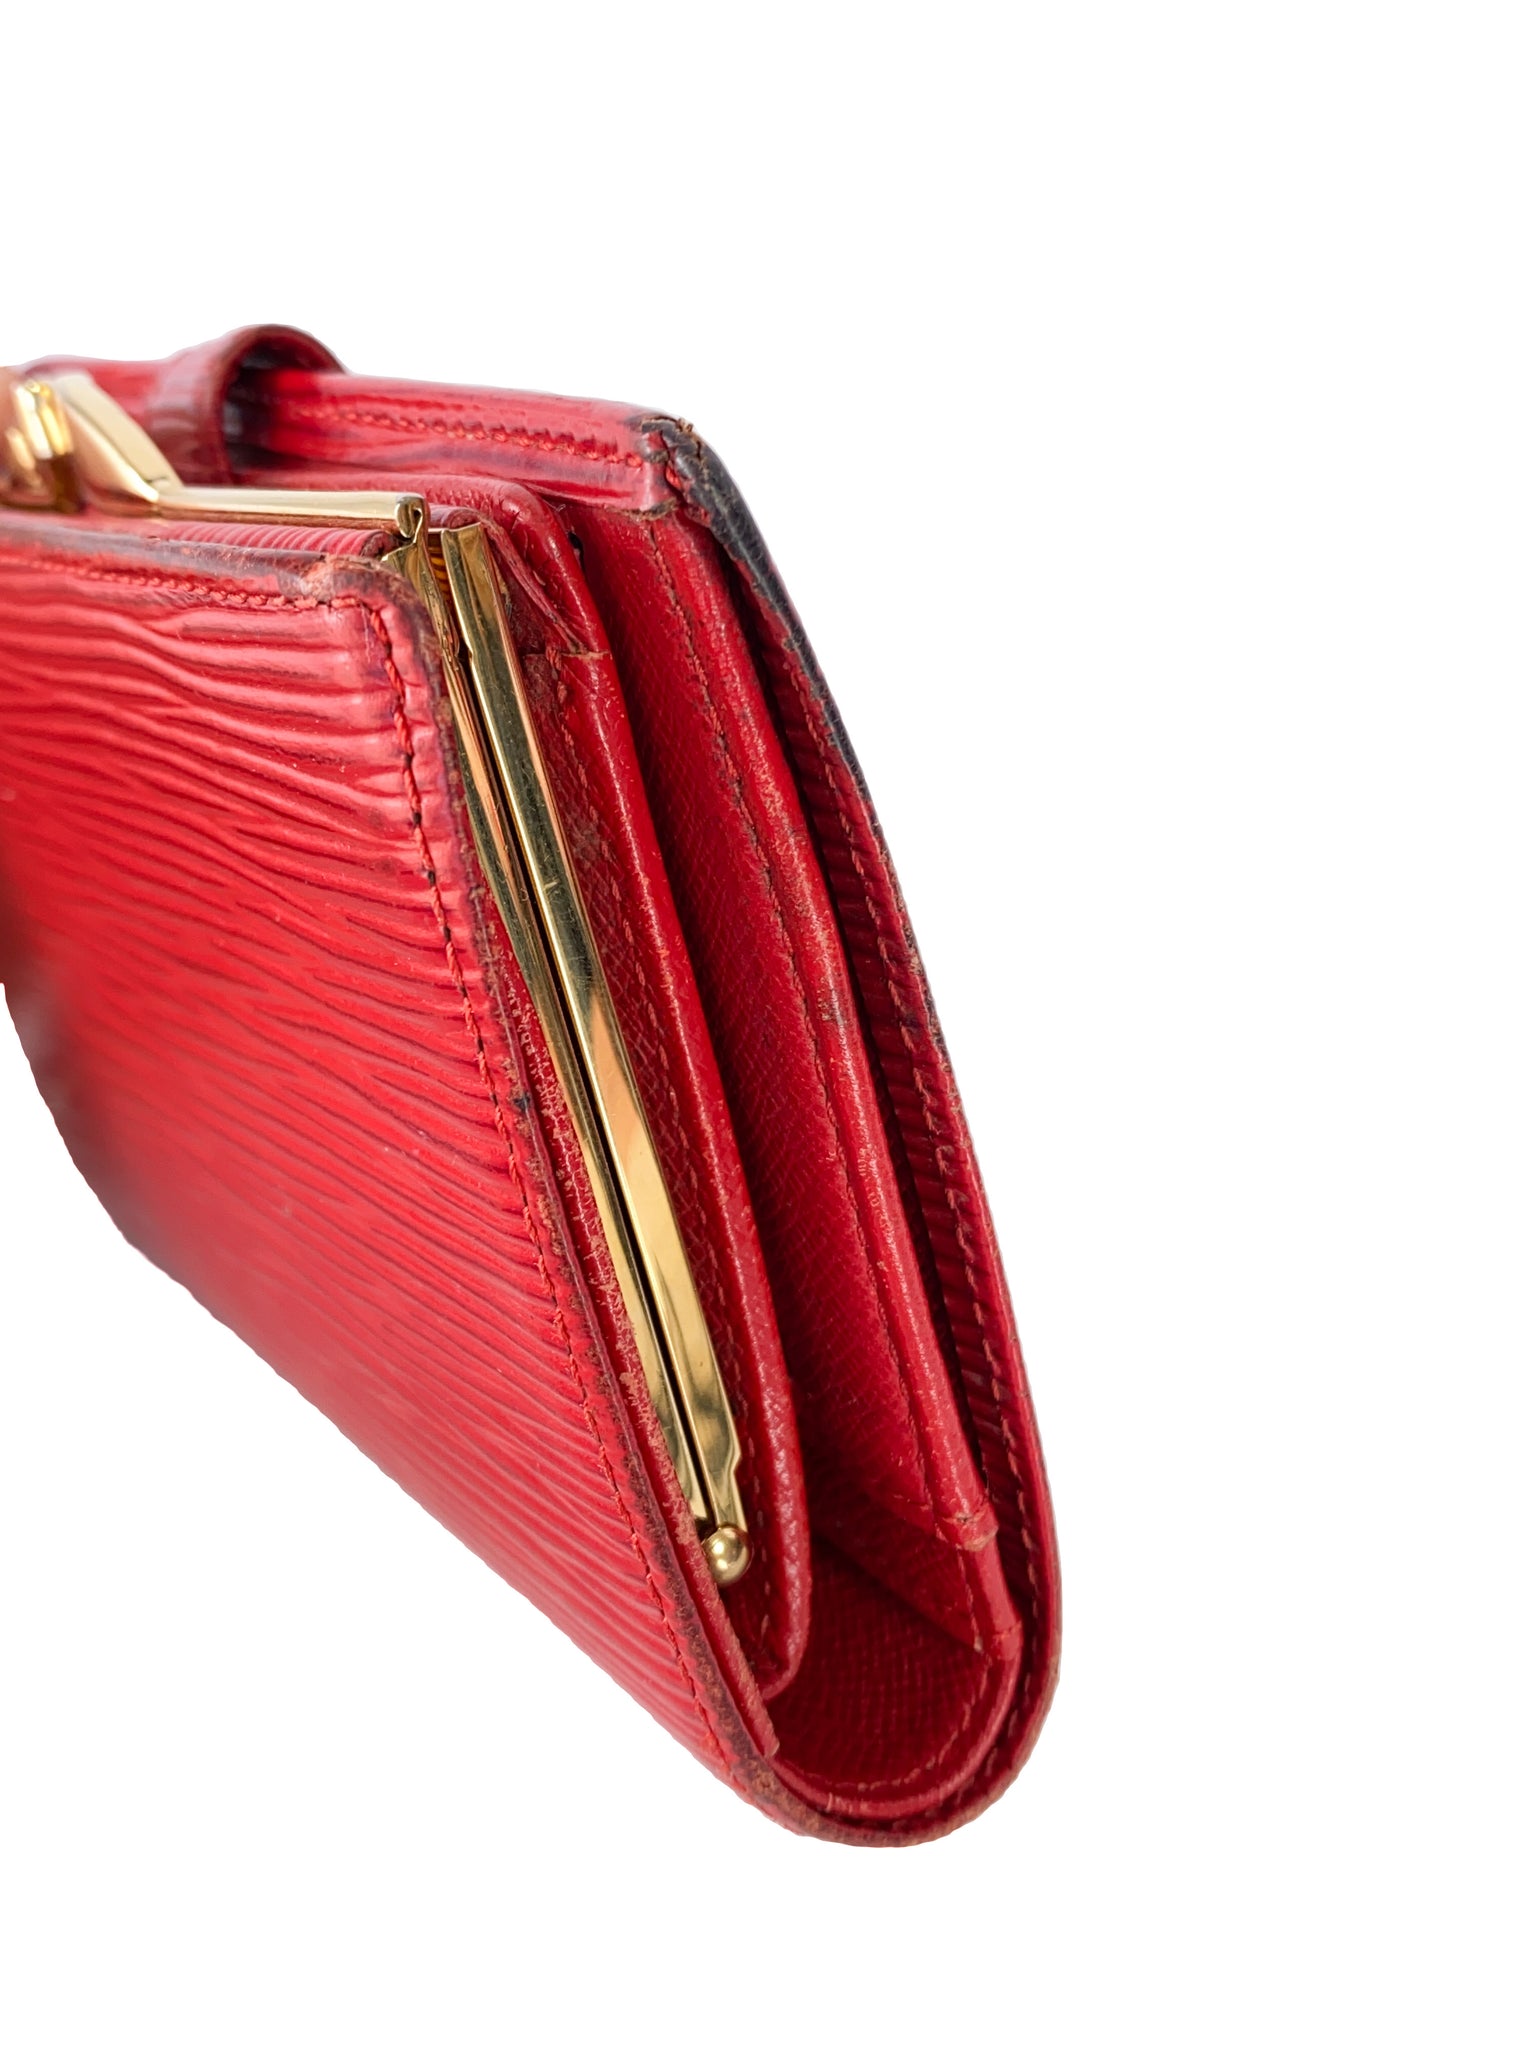 Louis Vuitton Red Epi French Purse Wallet at Jill's Consignment